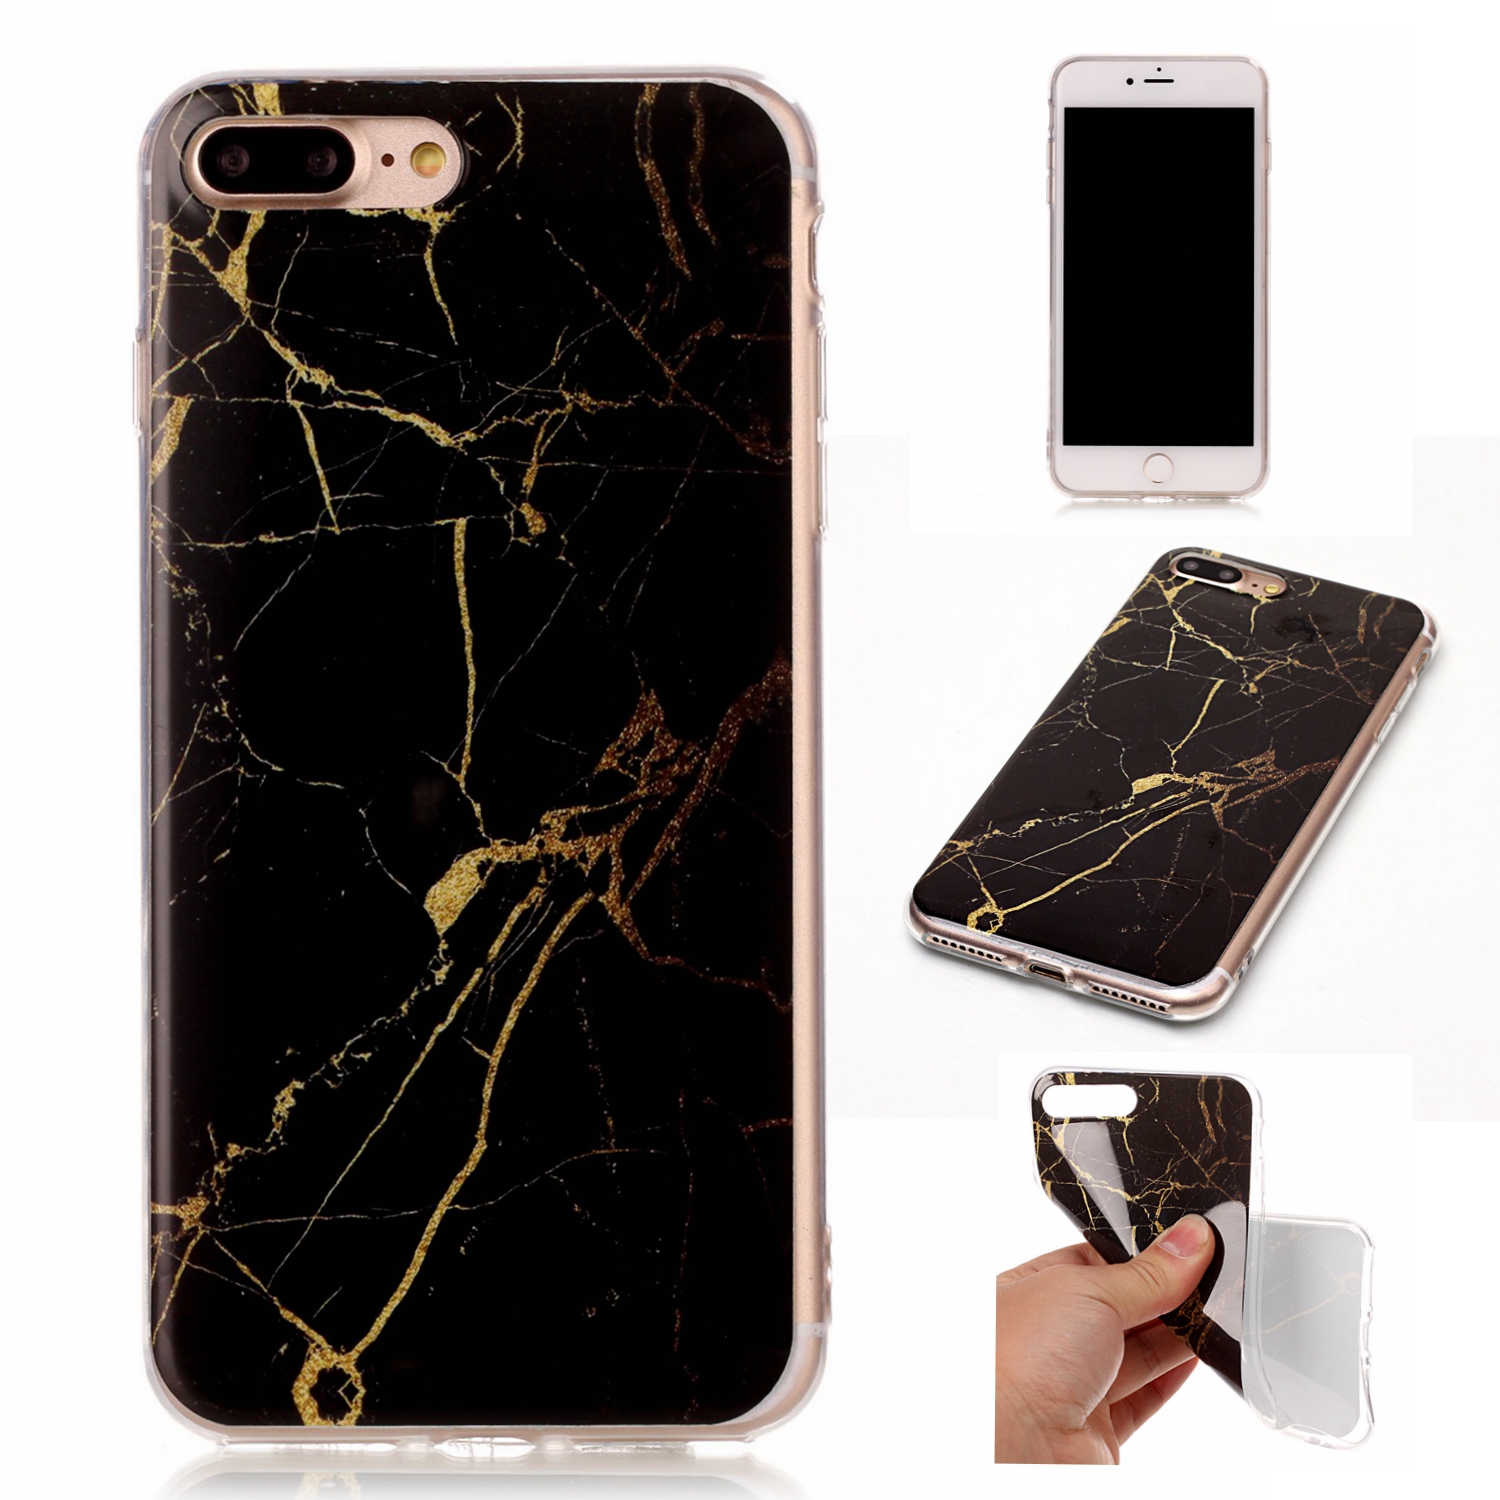 Bakeeytrade-Marble-Shockproof-Soft-TPU-Silicon-Case-for-iPhone-X-78-7Plus8Plus-1237826-6